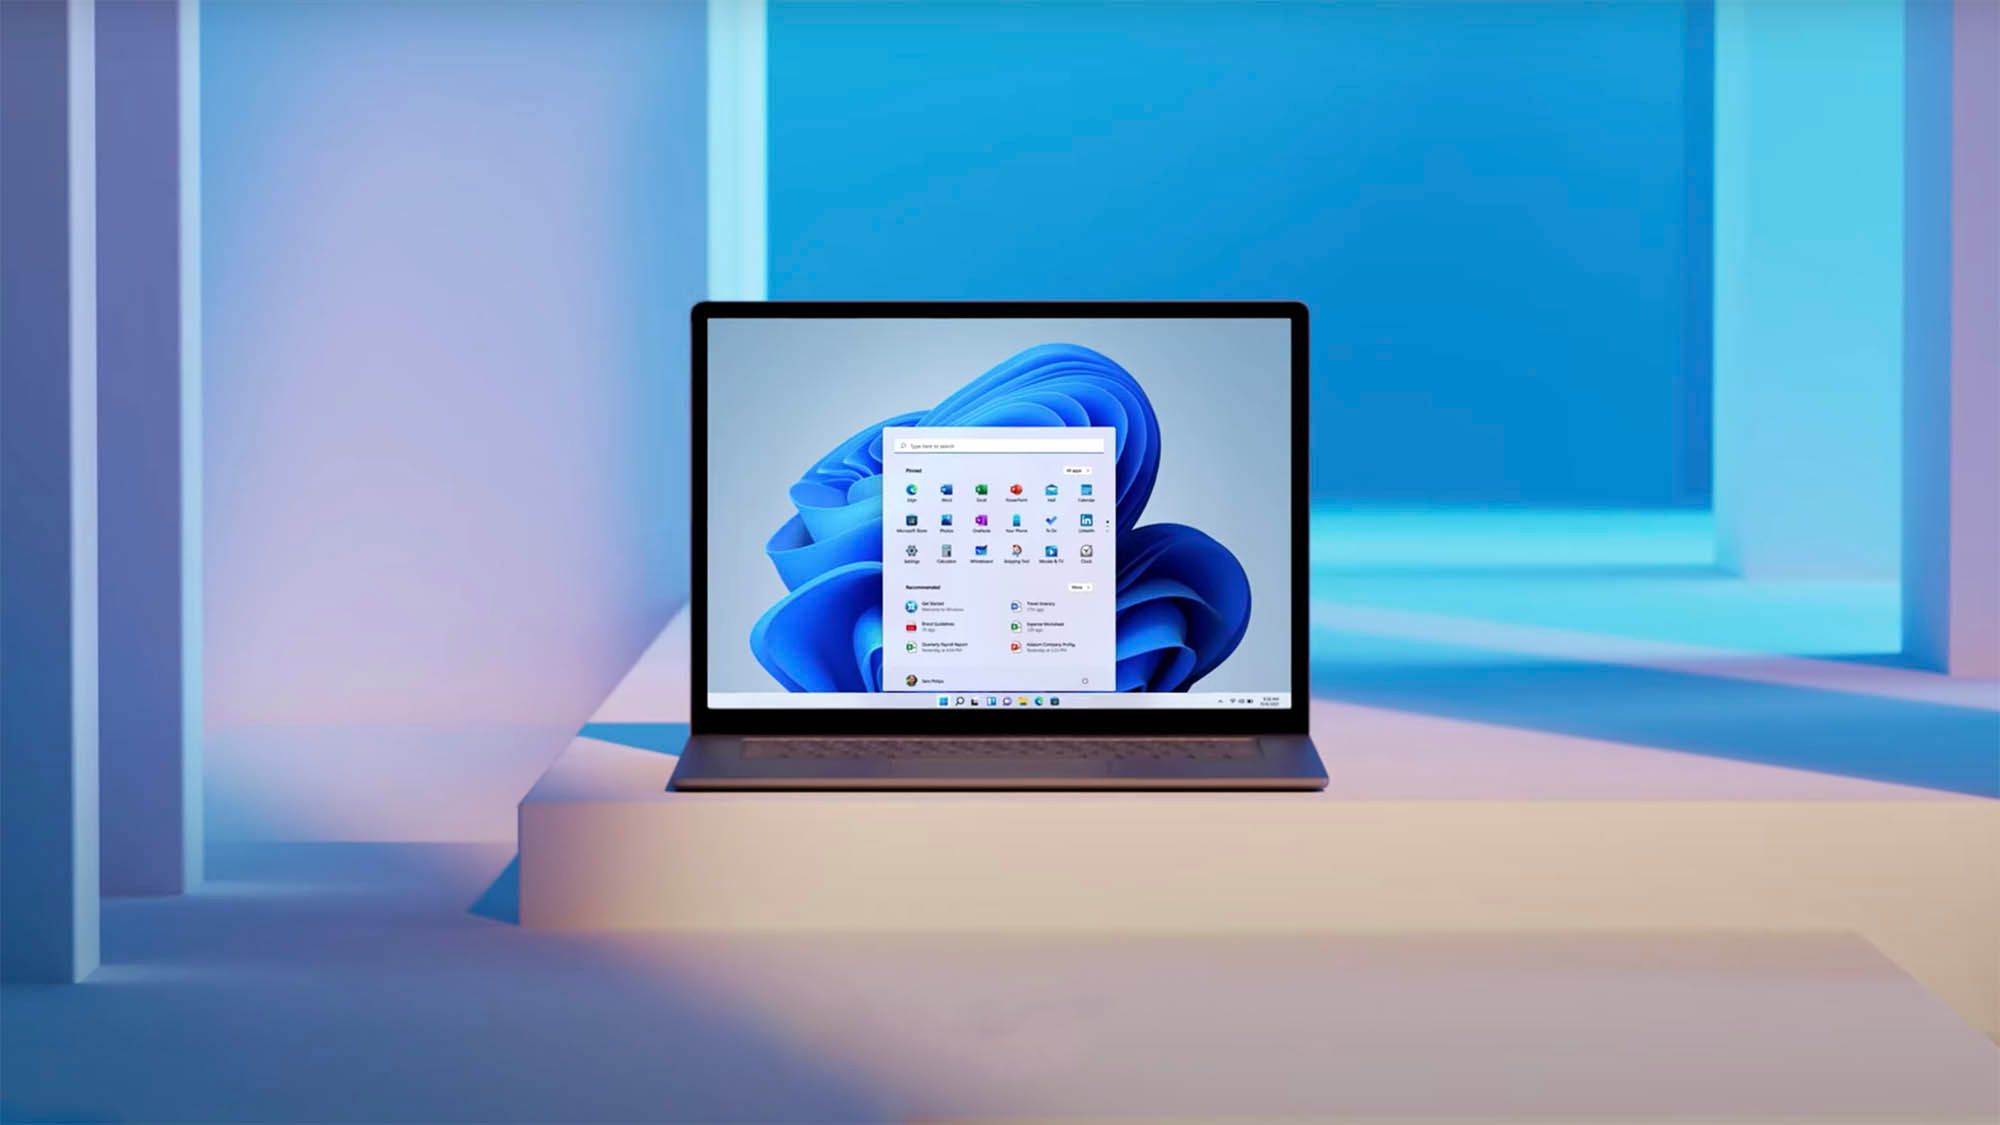 A laptop sits on a white step, surrounded by white and blue lighting. It's running Windows 11.